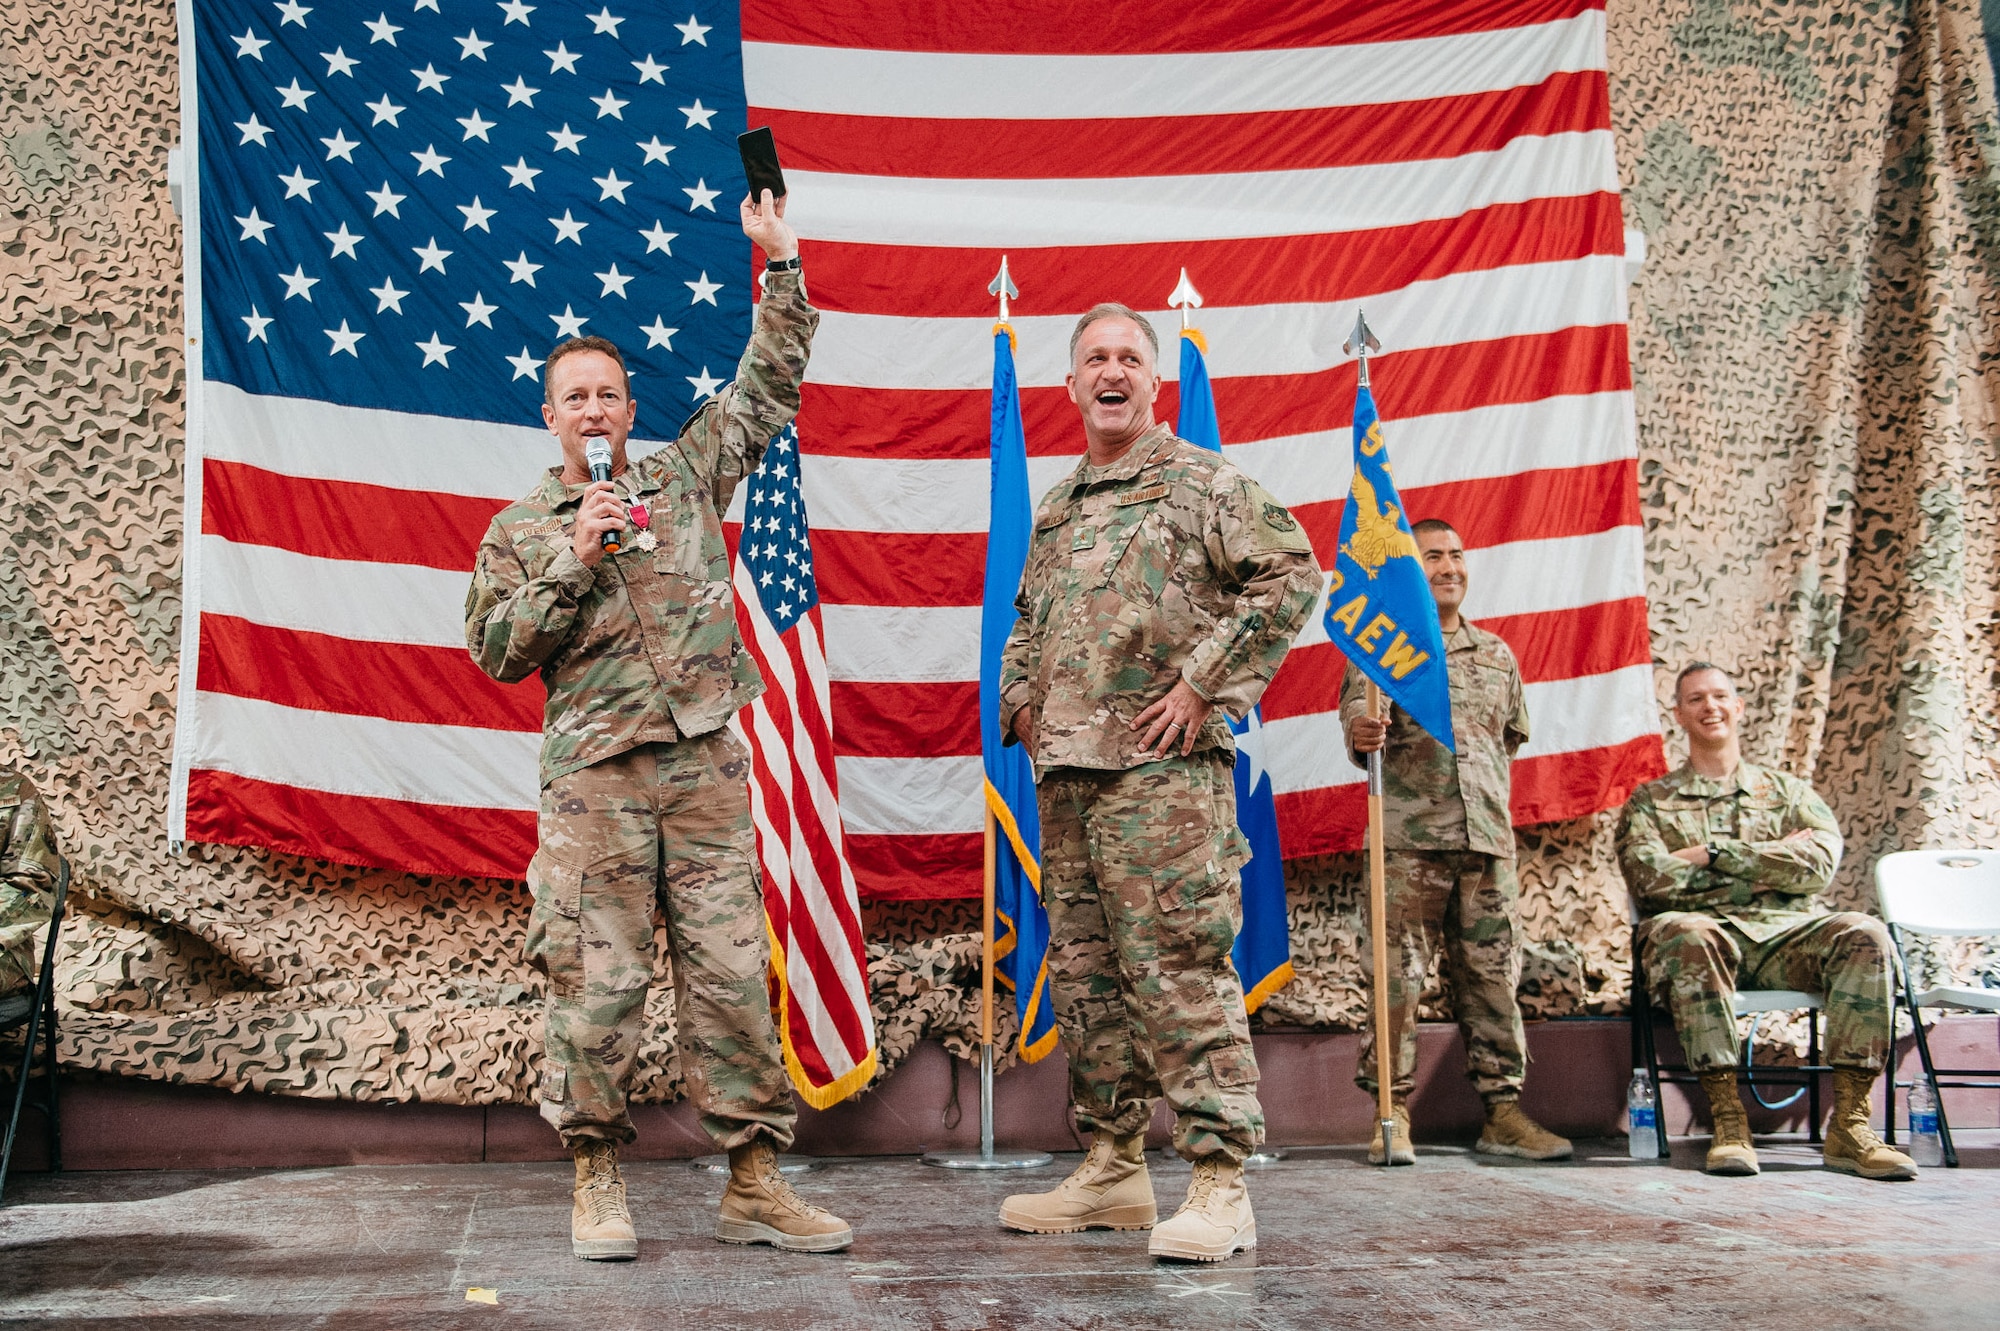 Brig. Gen. Mark Slocum, right, speaks with his predecessor Brig. Gen. David Iverson during a change of command ceremony in Southwest Asia, June 20, 2019.